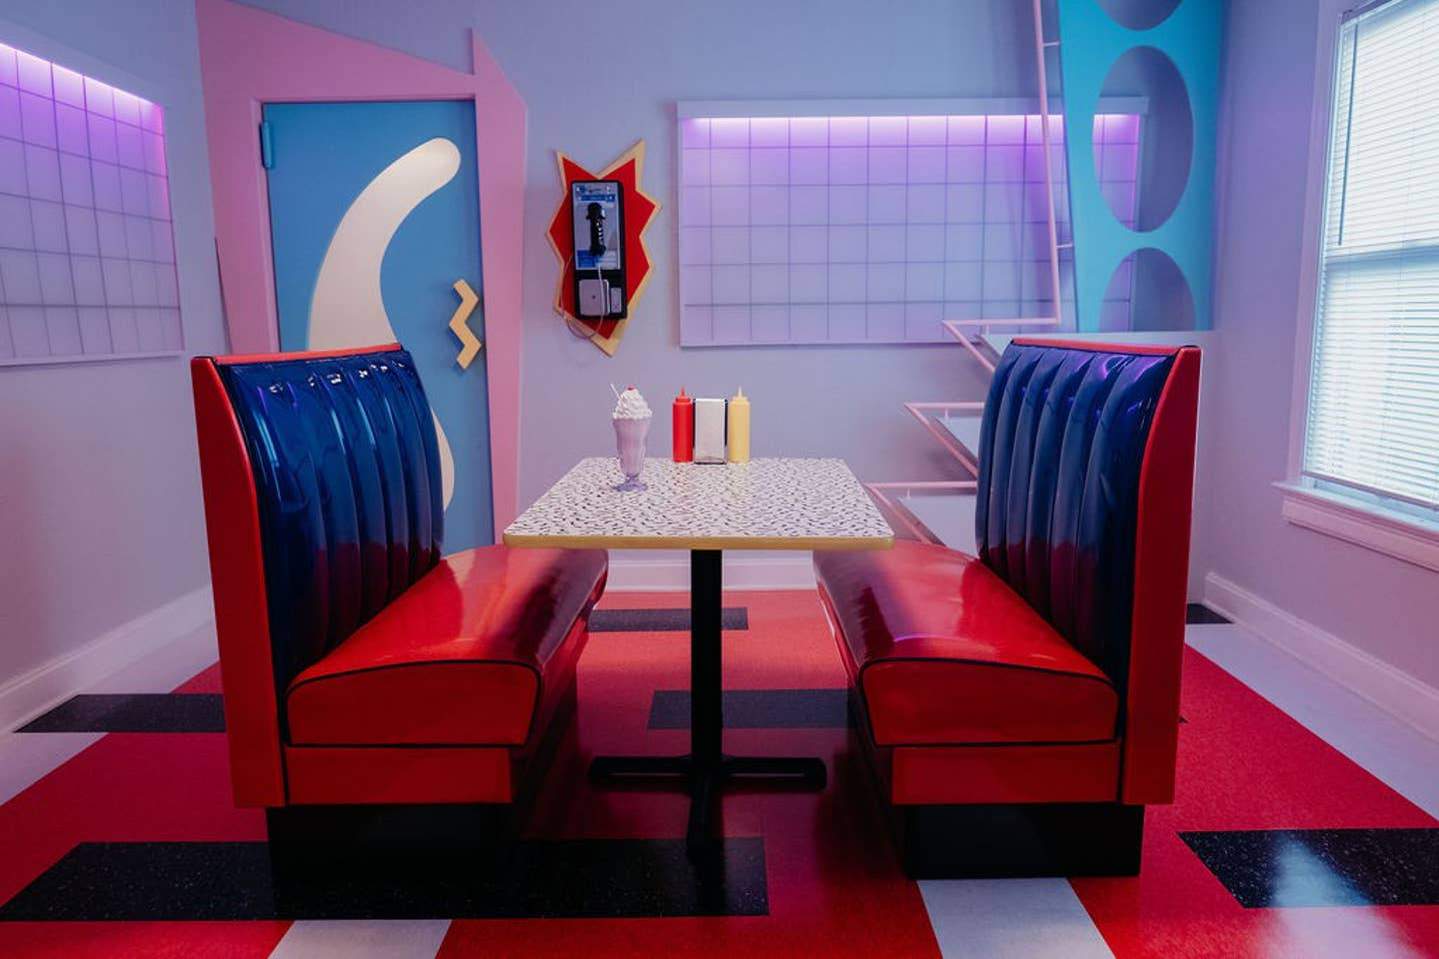 Hey, hey, hey: This ‘Saved by the Bell’-themed Airbnb in Texas is a haven for ’90s nostalgia